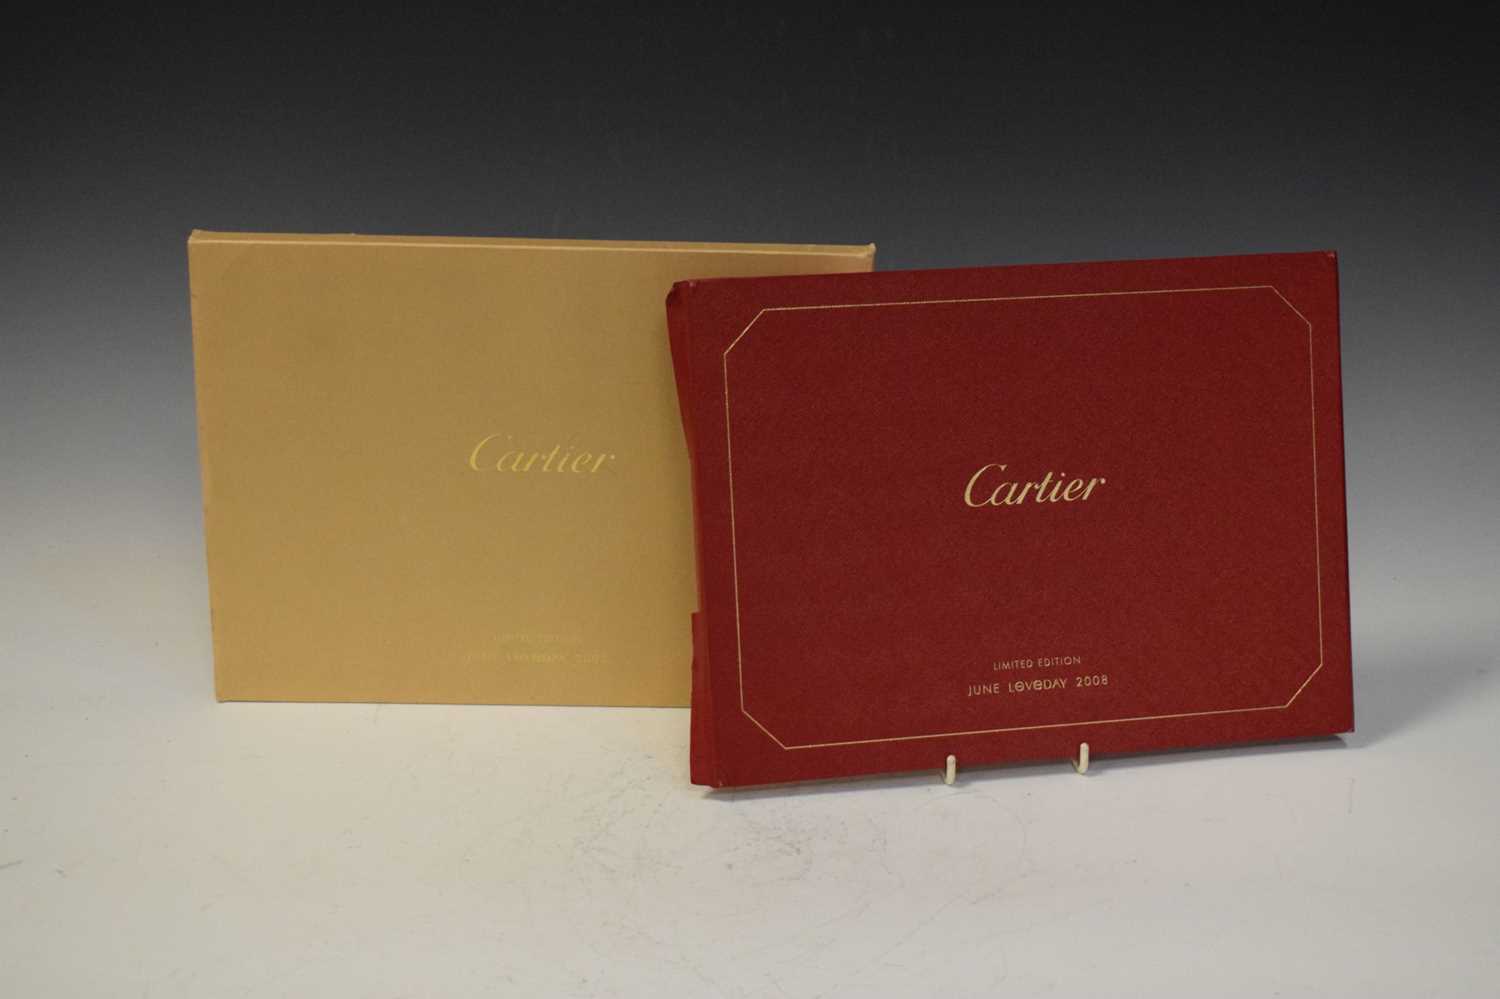 Cartier - Limited edition June Loveday 2008 stamps - Image 4 of 4